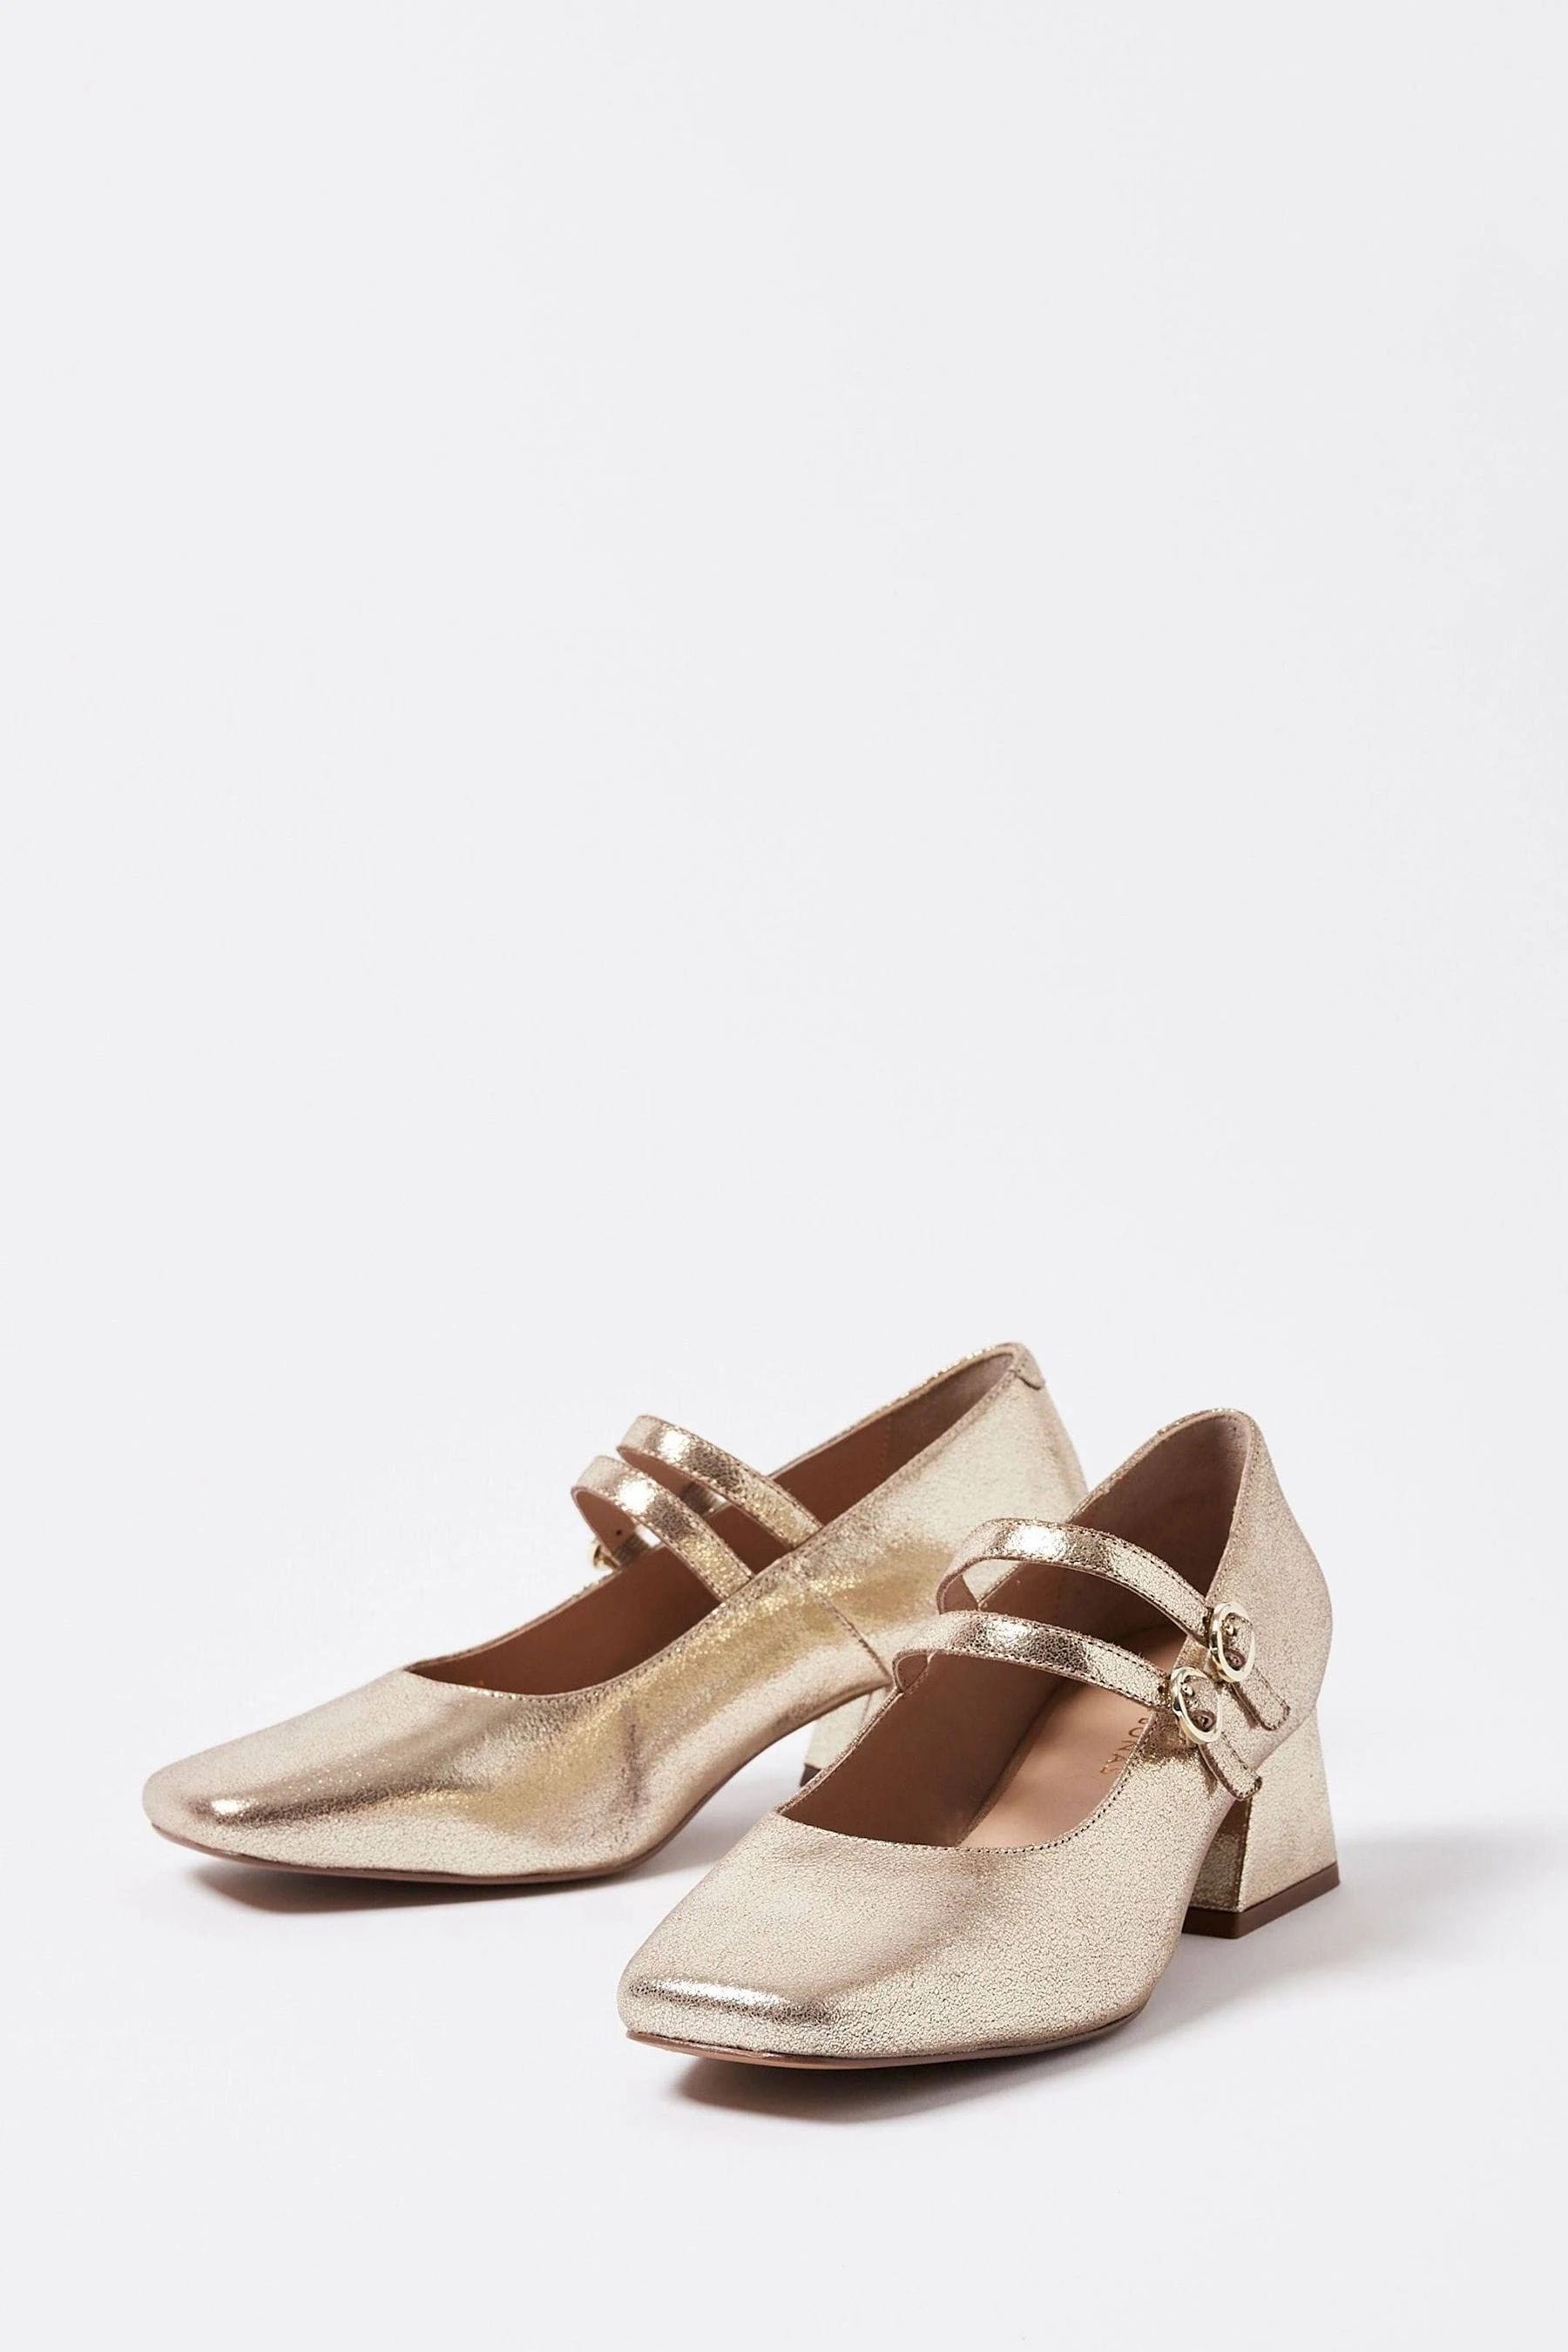 Gold Metallic Flared Shoes with Chic Mary Jane Design | Image